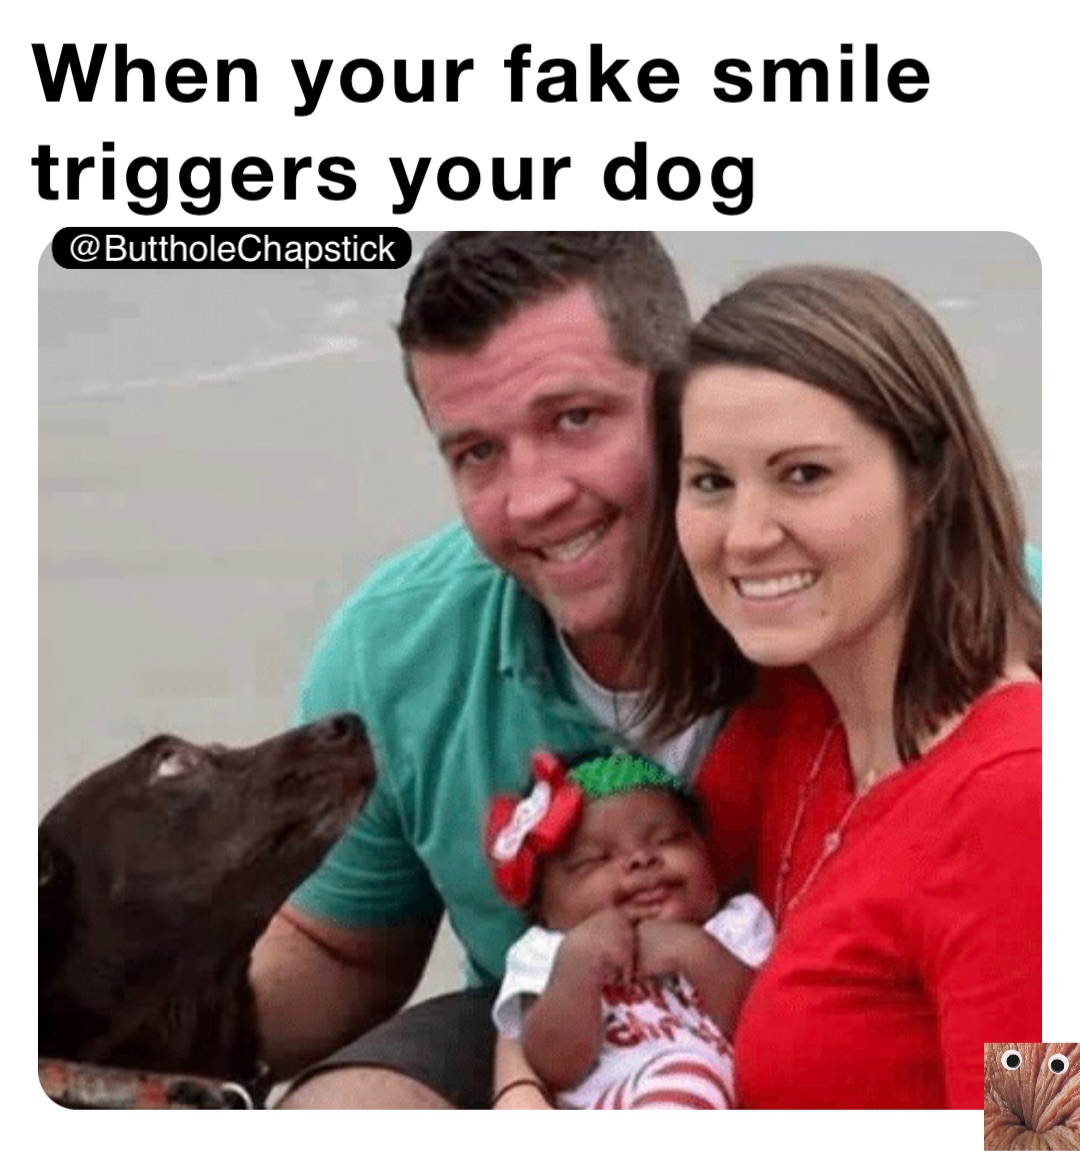 When your fake smile triggers your dog